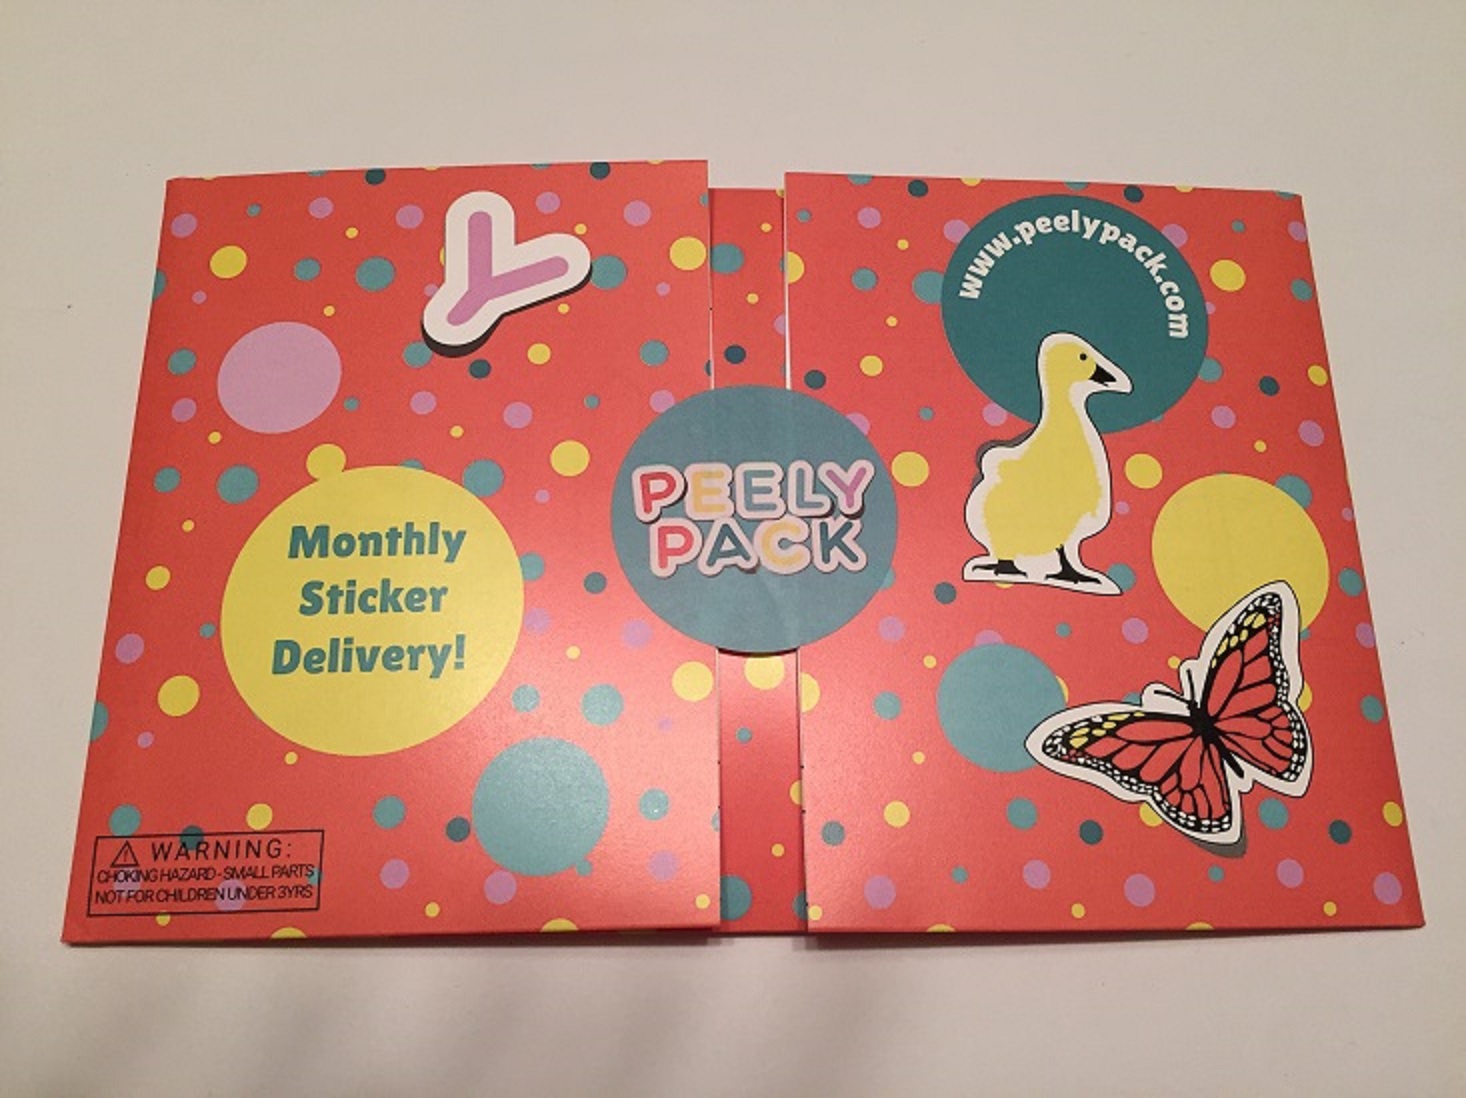 PeelyPack Sticker Subscription Review + Coupon- October 2016